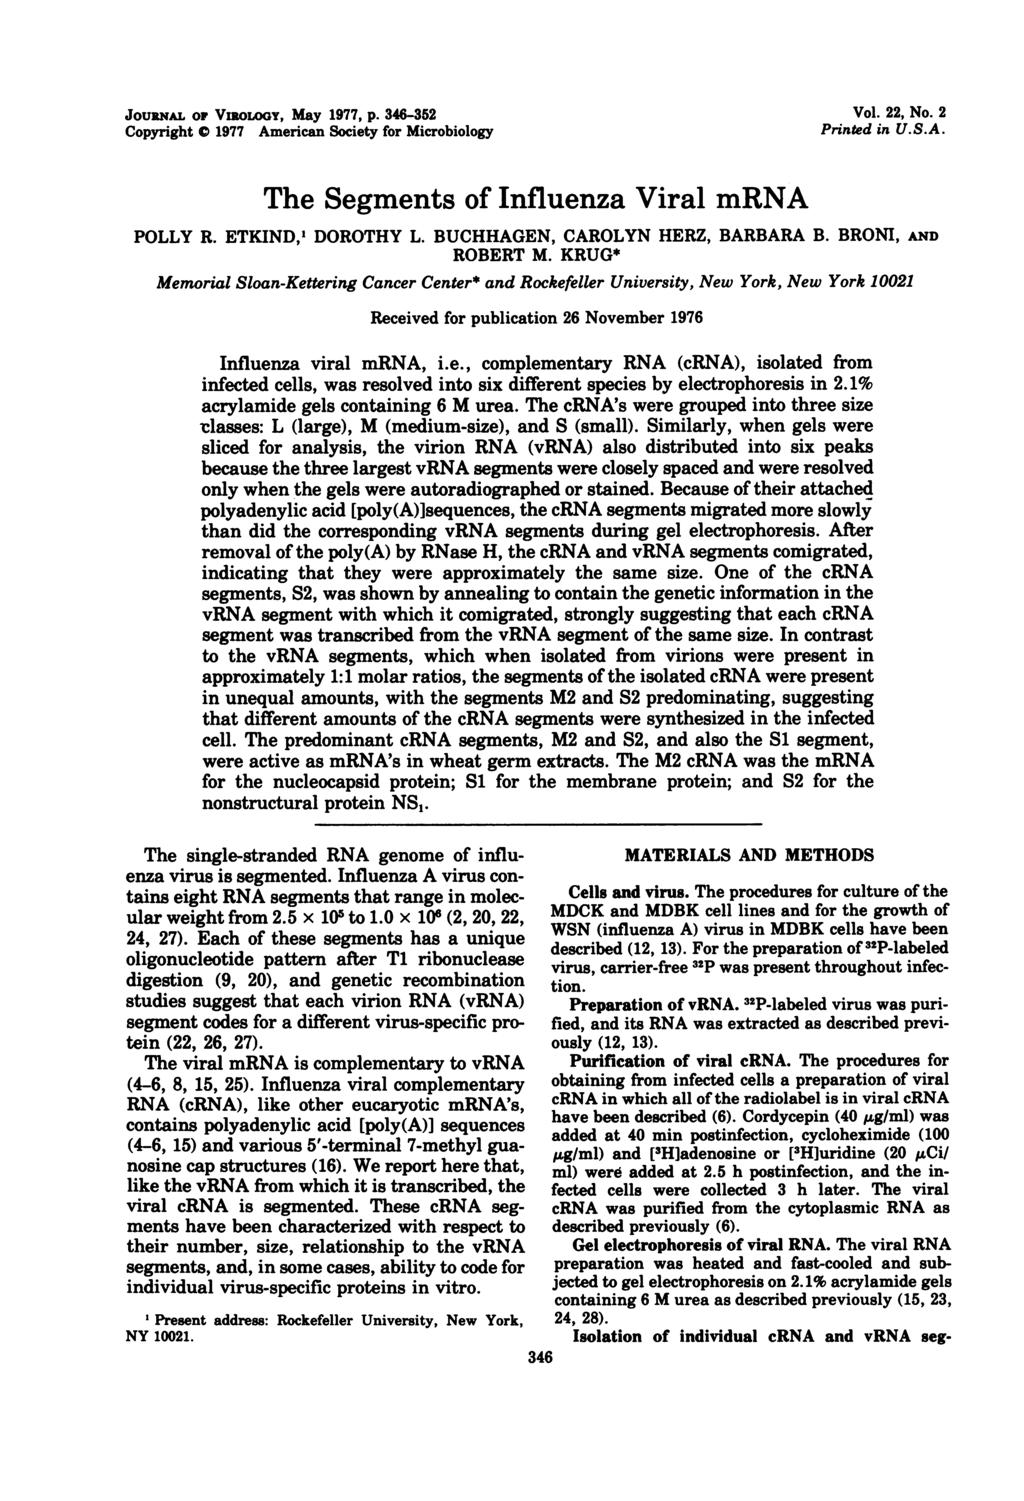 JousNAL of VIloLoGY, May 1977, p. 346-352 Copyright 0 1977 American Society for Microbiology Vol. 22, No. 2 Printed in U.S.A. The Segments of Influenza Viral mrna POLLY R. ETKIND,' DOROTHY L.